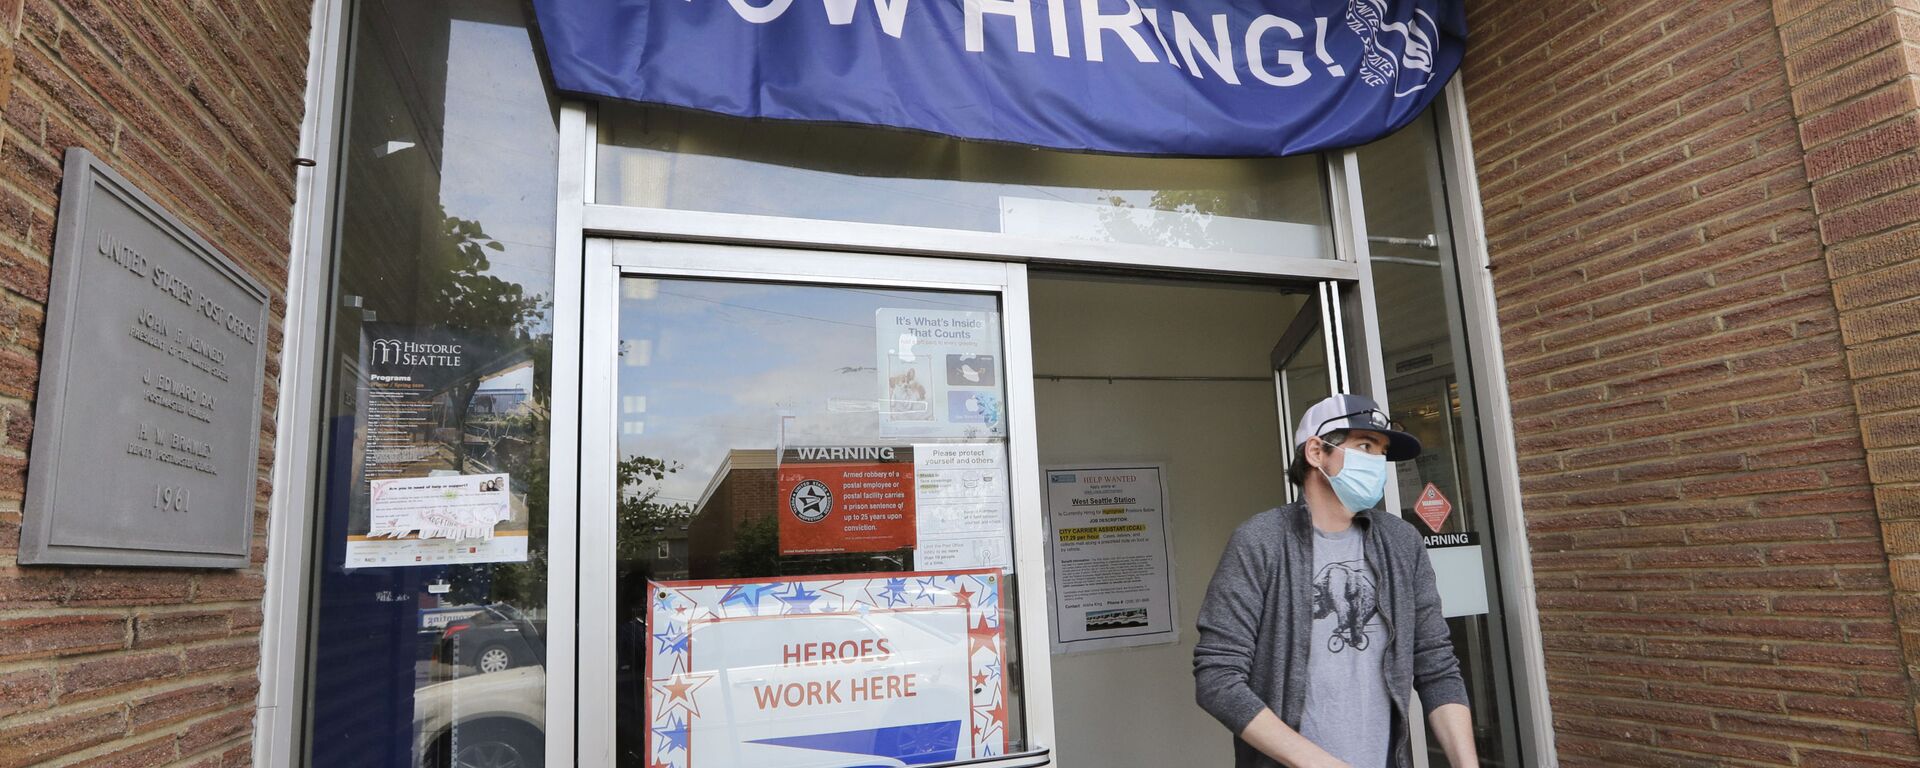 In this Thursday, June 4, 2020 file photo, a customer walks out of a U.S. Post Office branch and under a banner advertising a job opening, in Seattle. The job market took a big step toward healing in May 2020, though plenty of damage remains, as a record level of hiring followed record layoffs in March and April. The Labor Department reported Tuesday, July 7, 2020 that the number of available jobs rose sharply as well, but remained far below pre-pandemic levels.  - Sputnik International, 1920, 03.08.2022